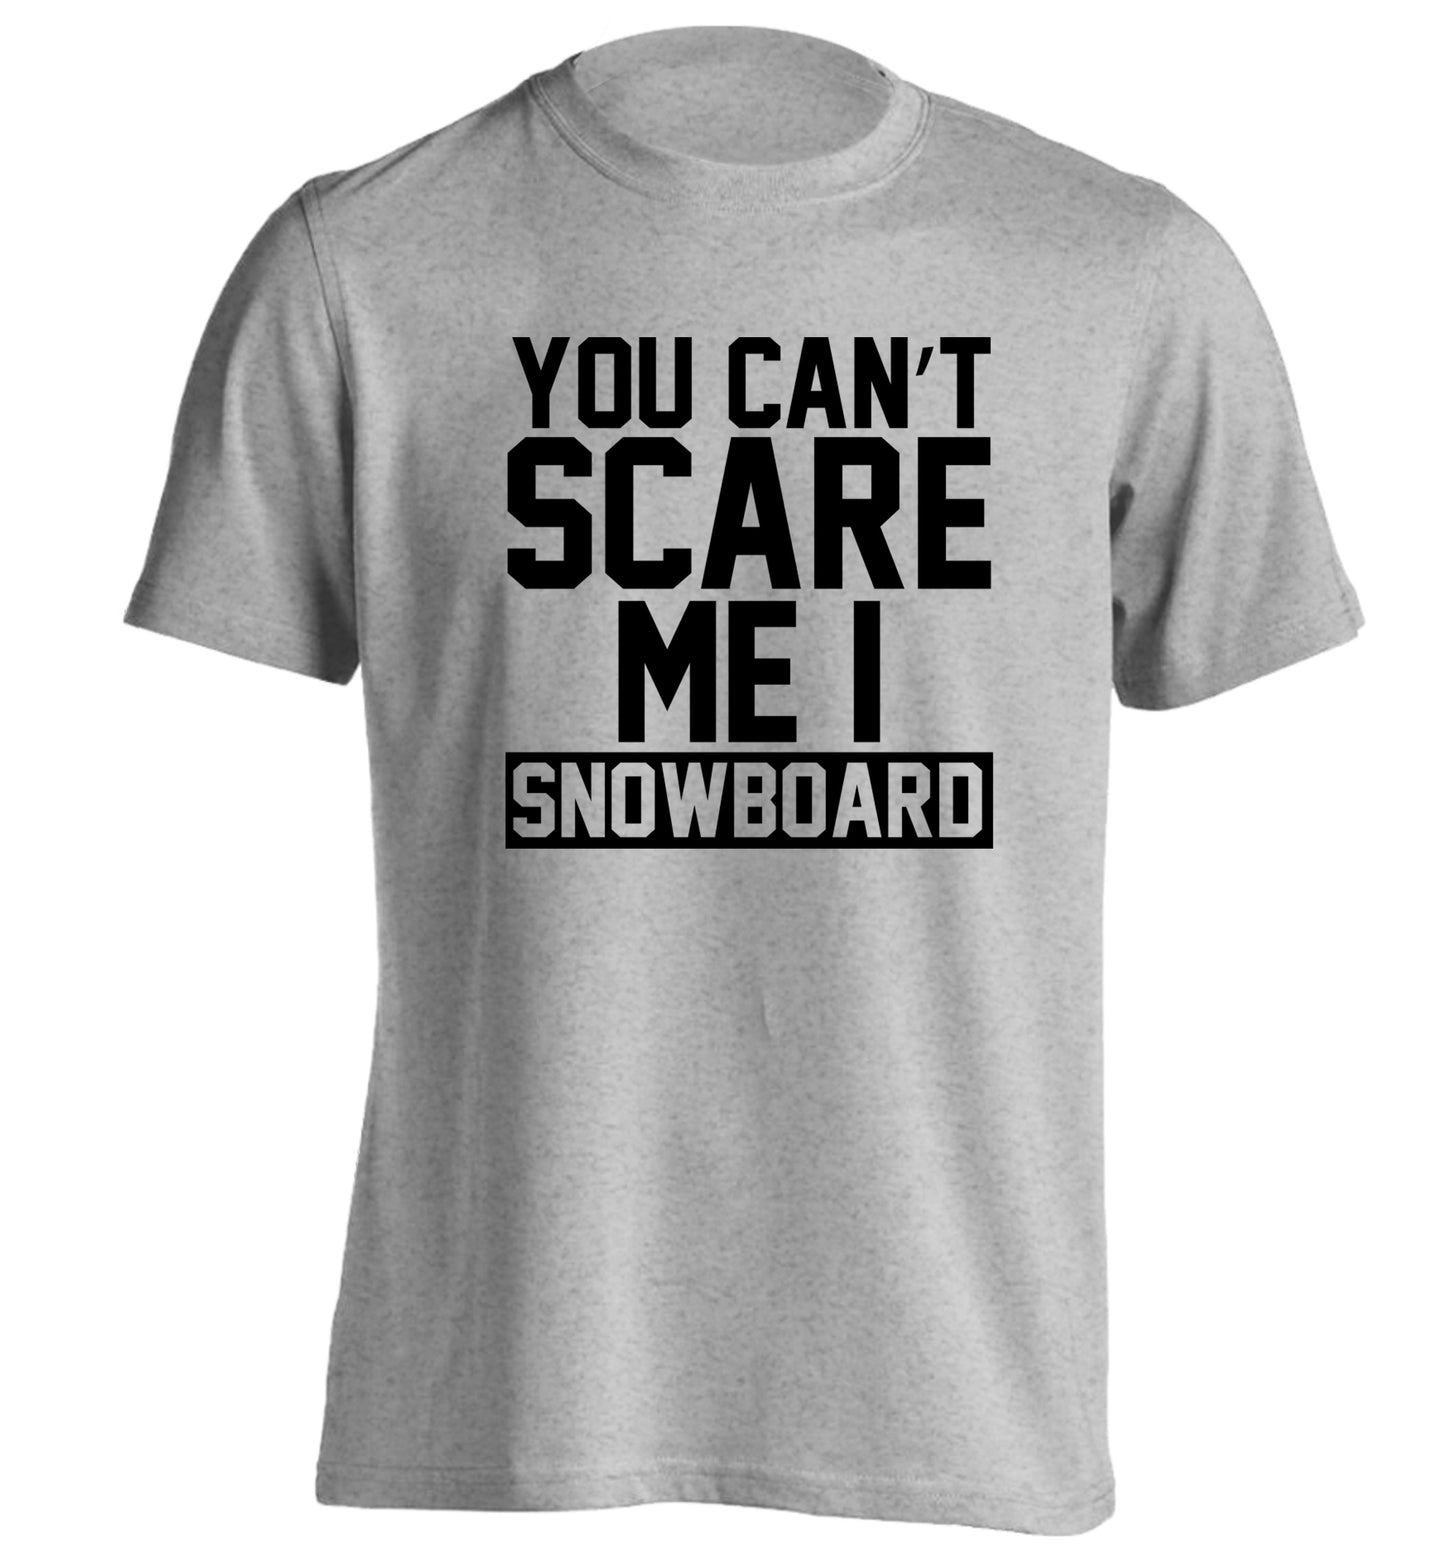 You can't scare me I snowboard adults unisex grey Tshirt 2XL